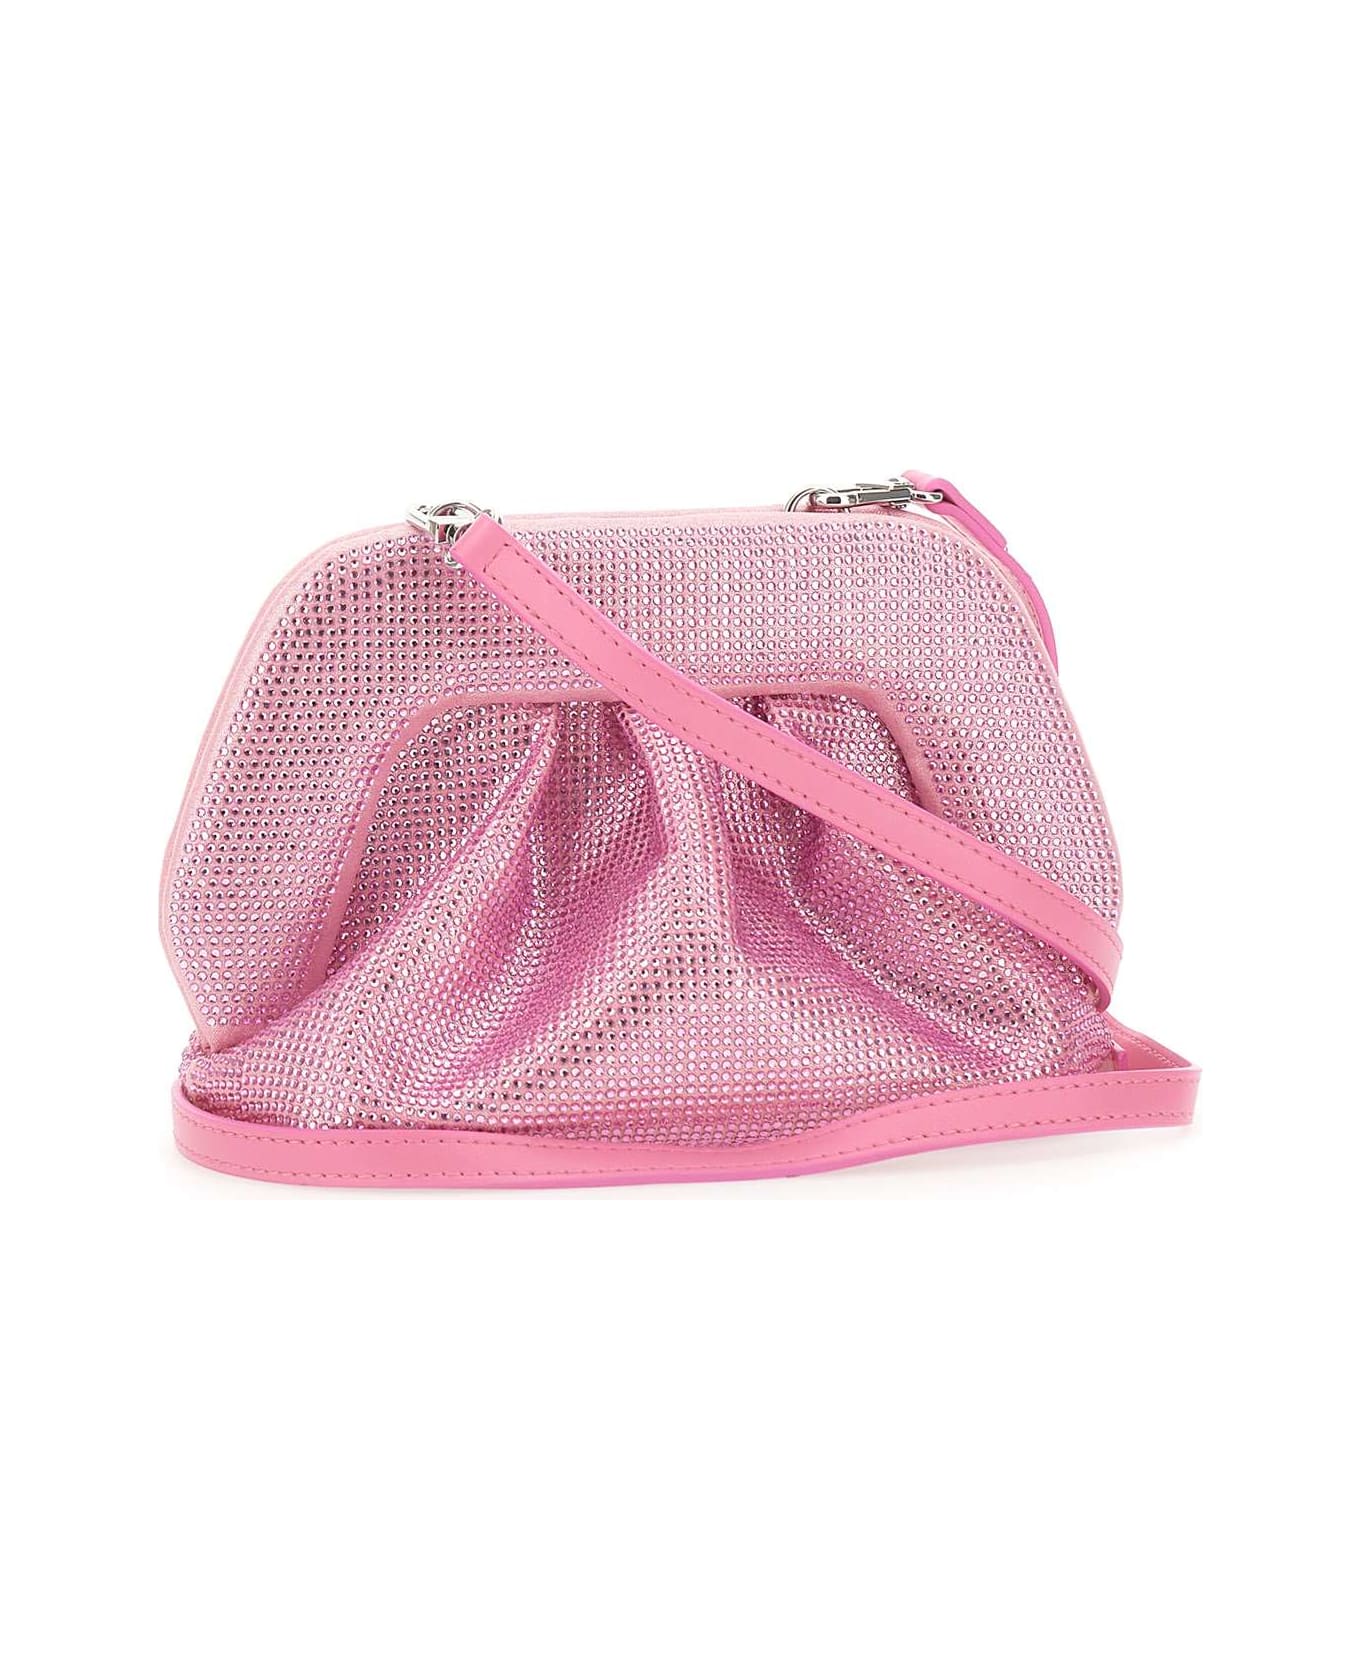 THEMOIRè "gea Strass" Vegan Leather Clutch Bag - PINK クラッチバッグ